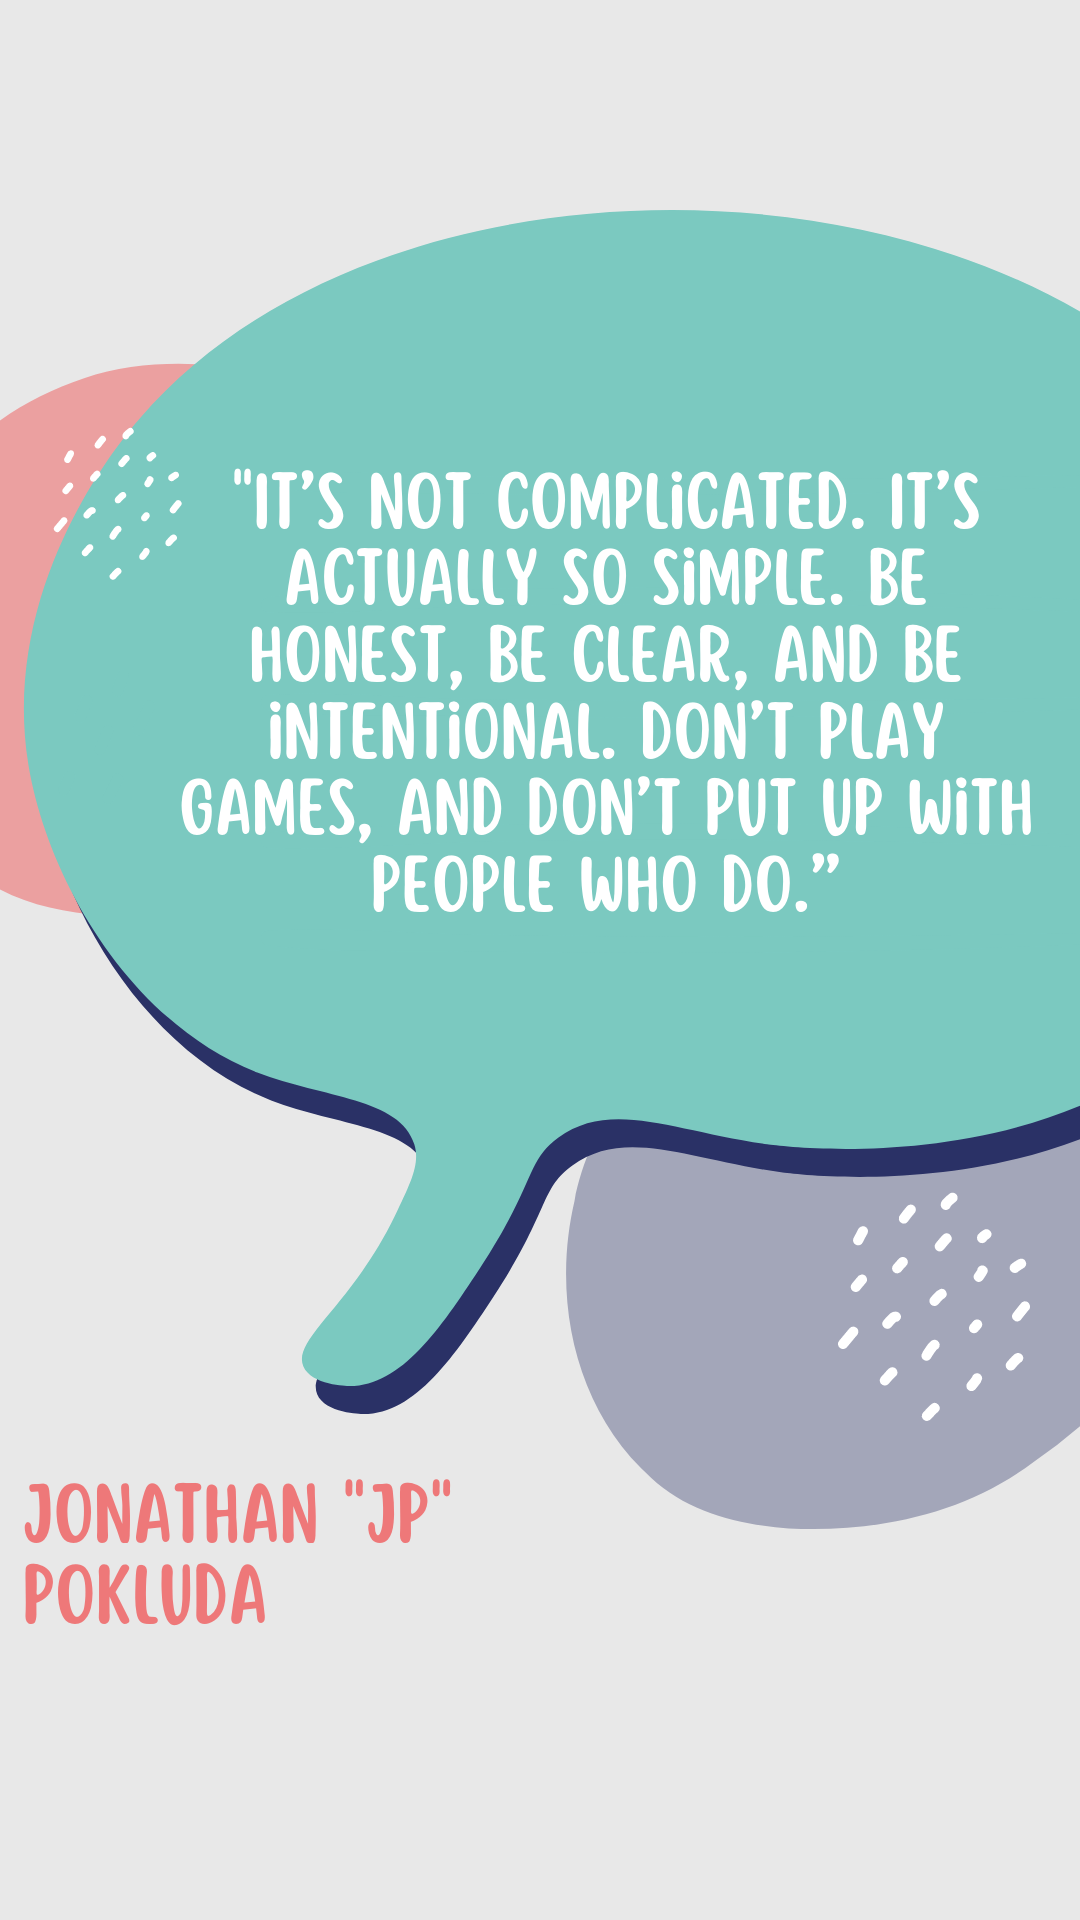 According to Jonathan “JP” Pokluda, “ It’s not complicated. It’s actually so simple. Be honest, be clear, and be intentional. Don’t play games, and don’t put up with people who do.”